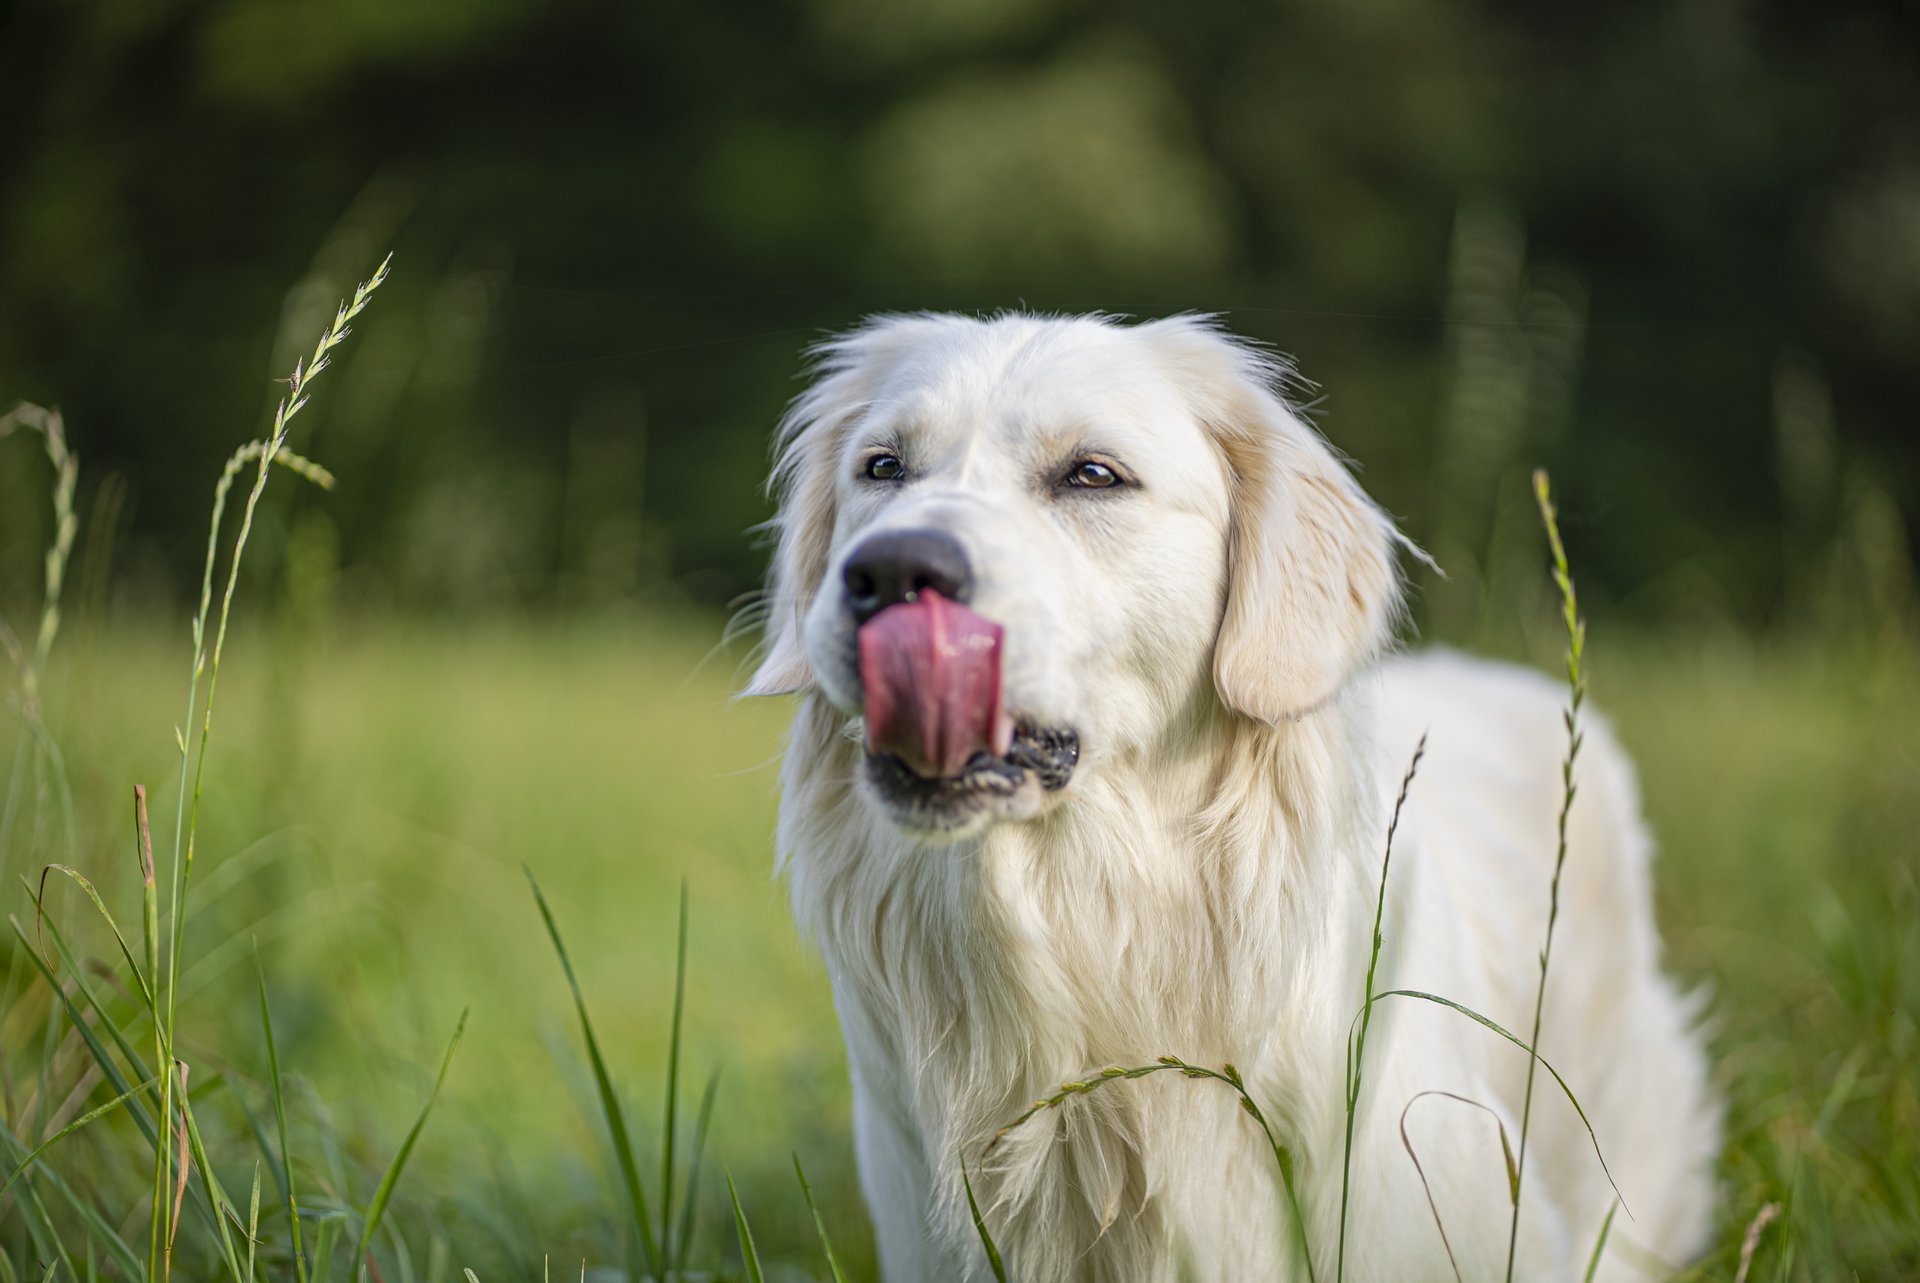 can i grow grass for my dog to eat